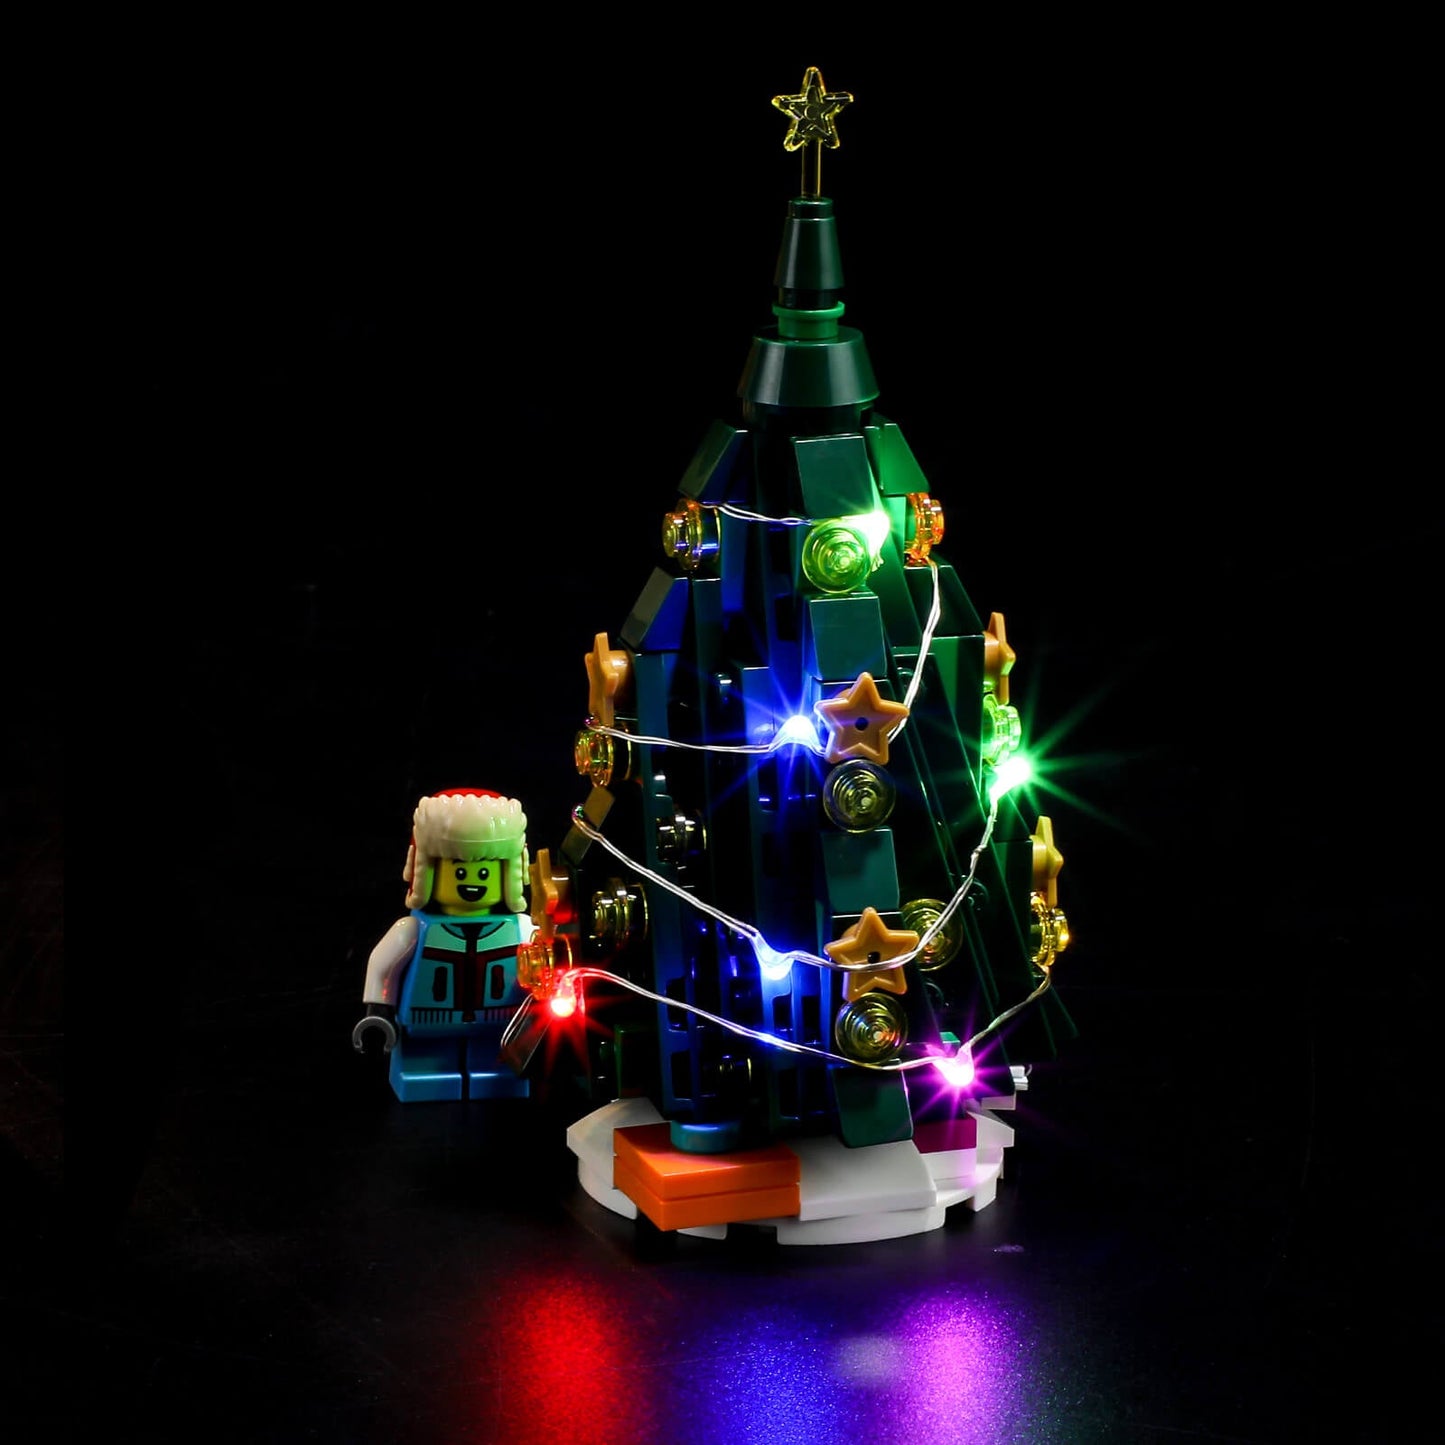 Lego Holiday Main Street 10308 Christmax tree with lights